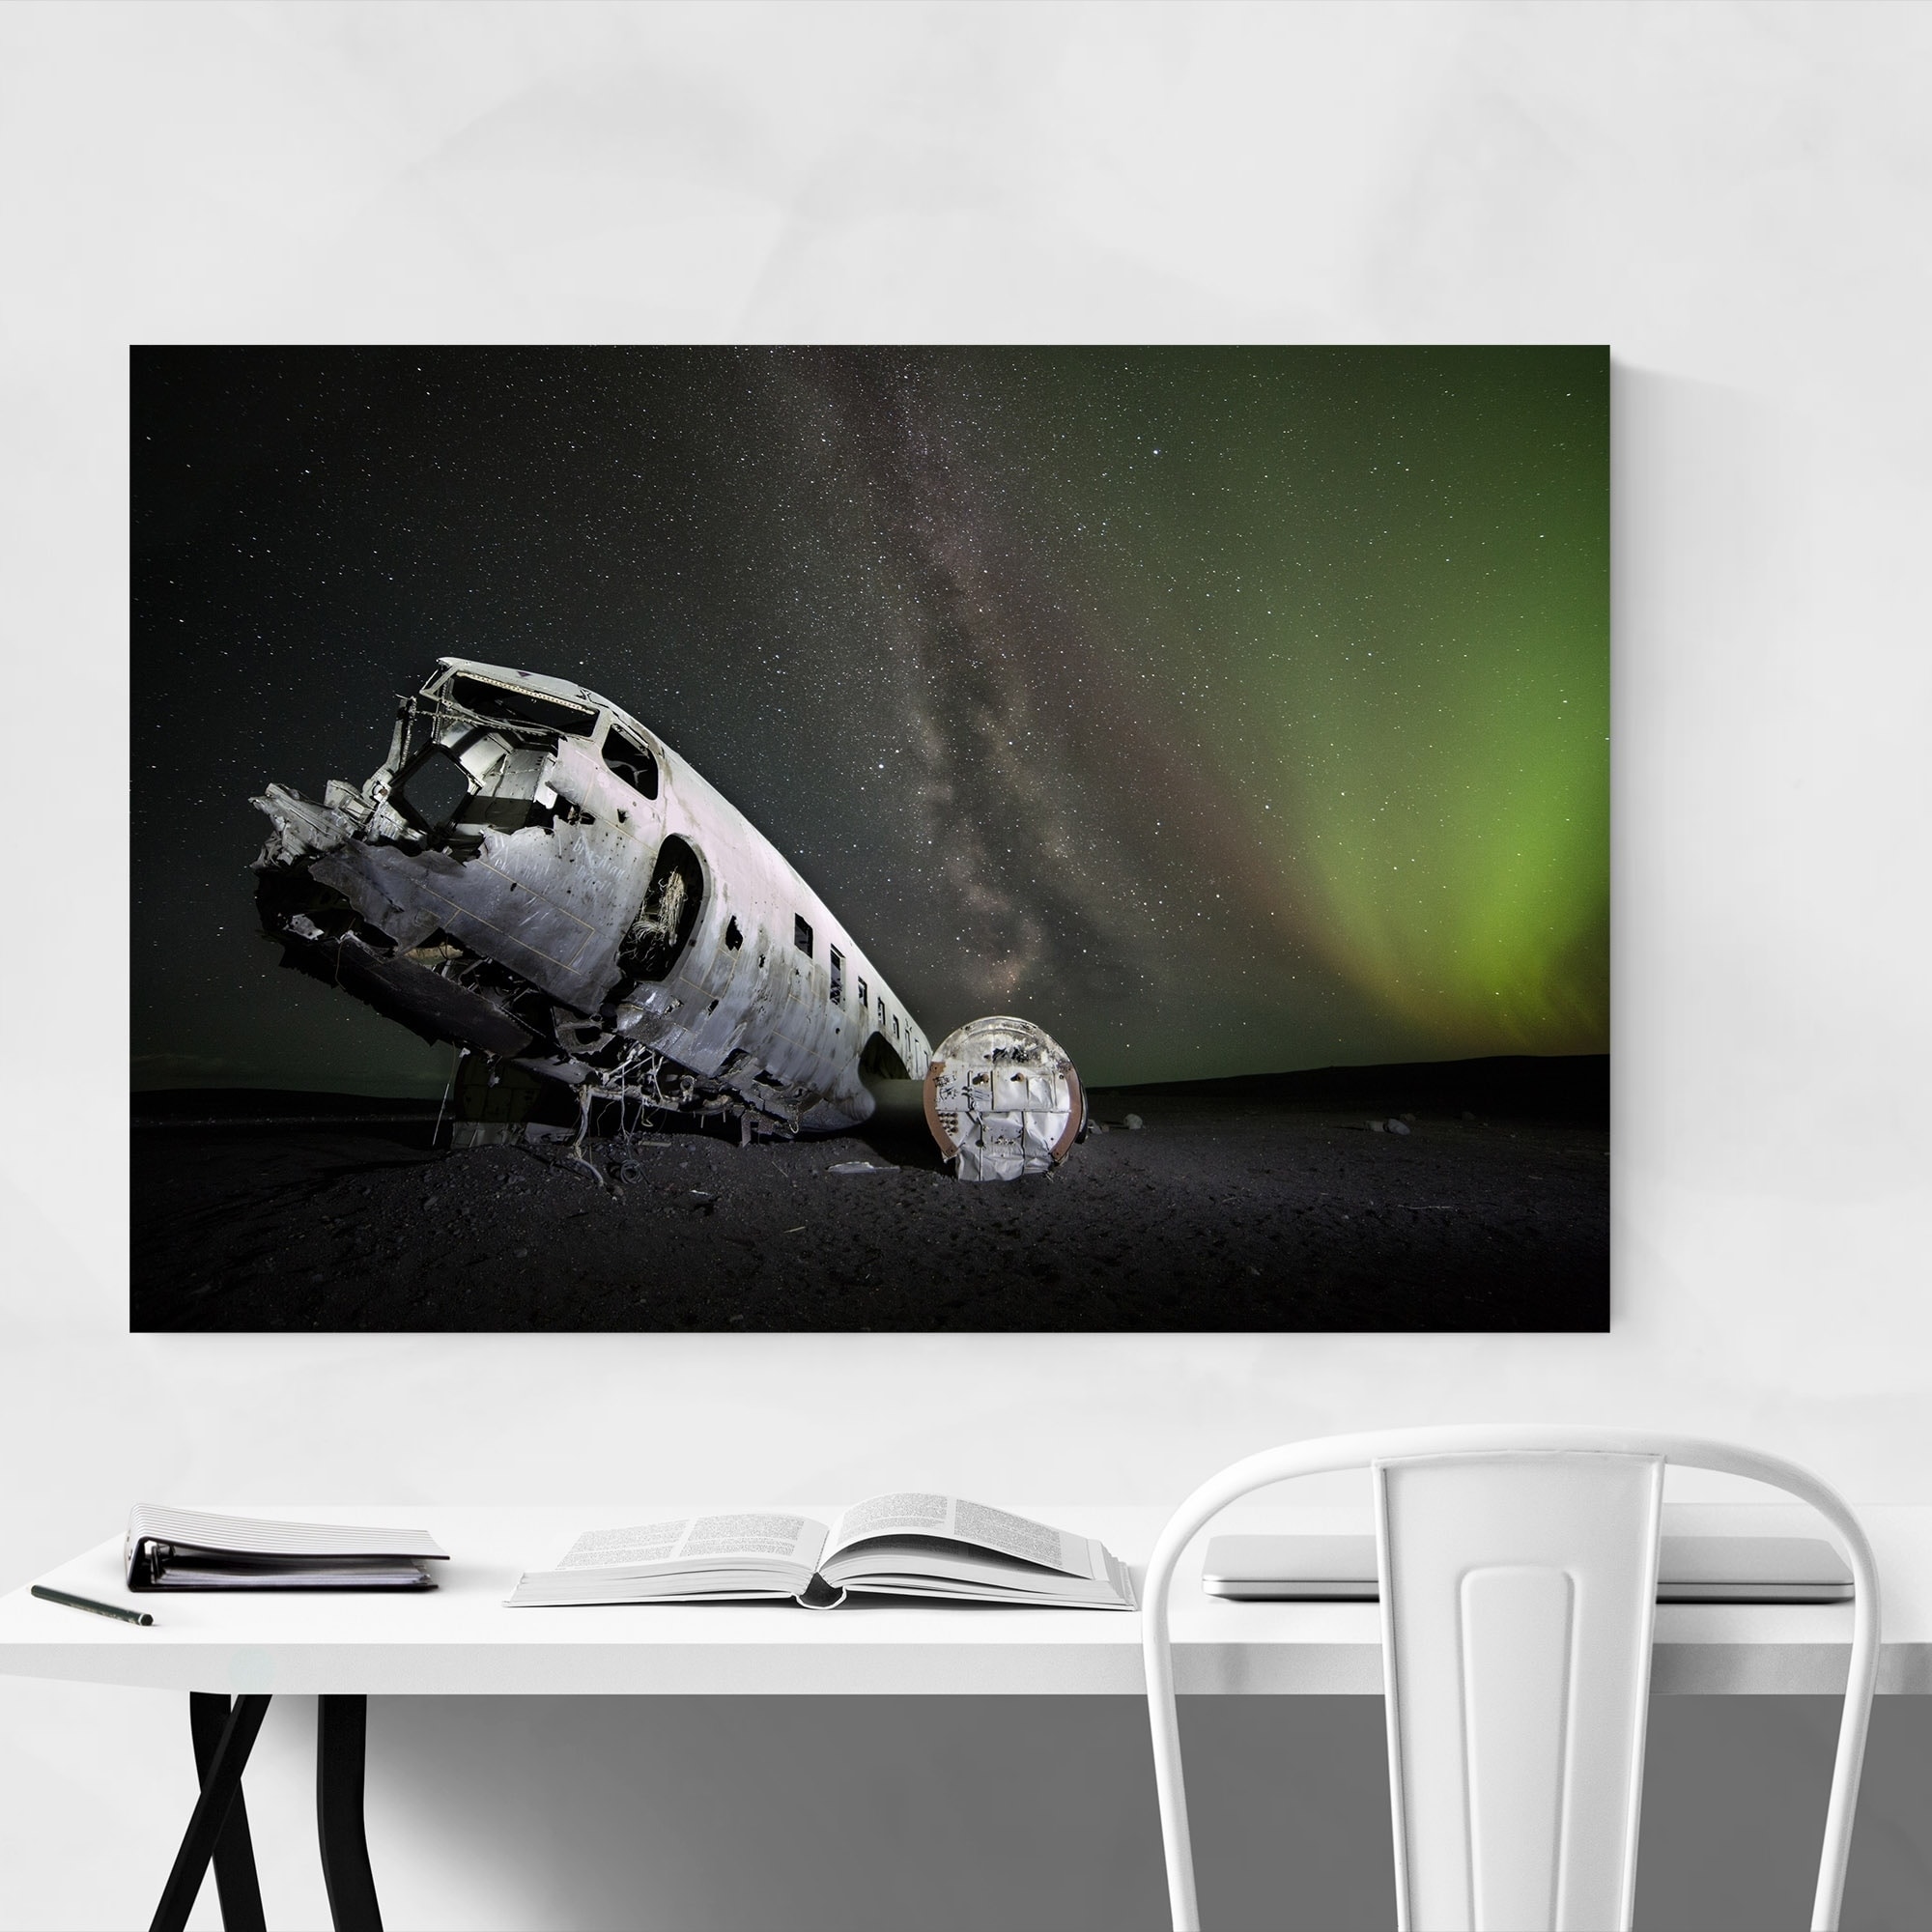 Shop Noir Gallery Abandoned Airplane Iceland Metal Wall Art Print Overstock 28160655